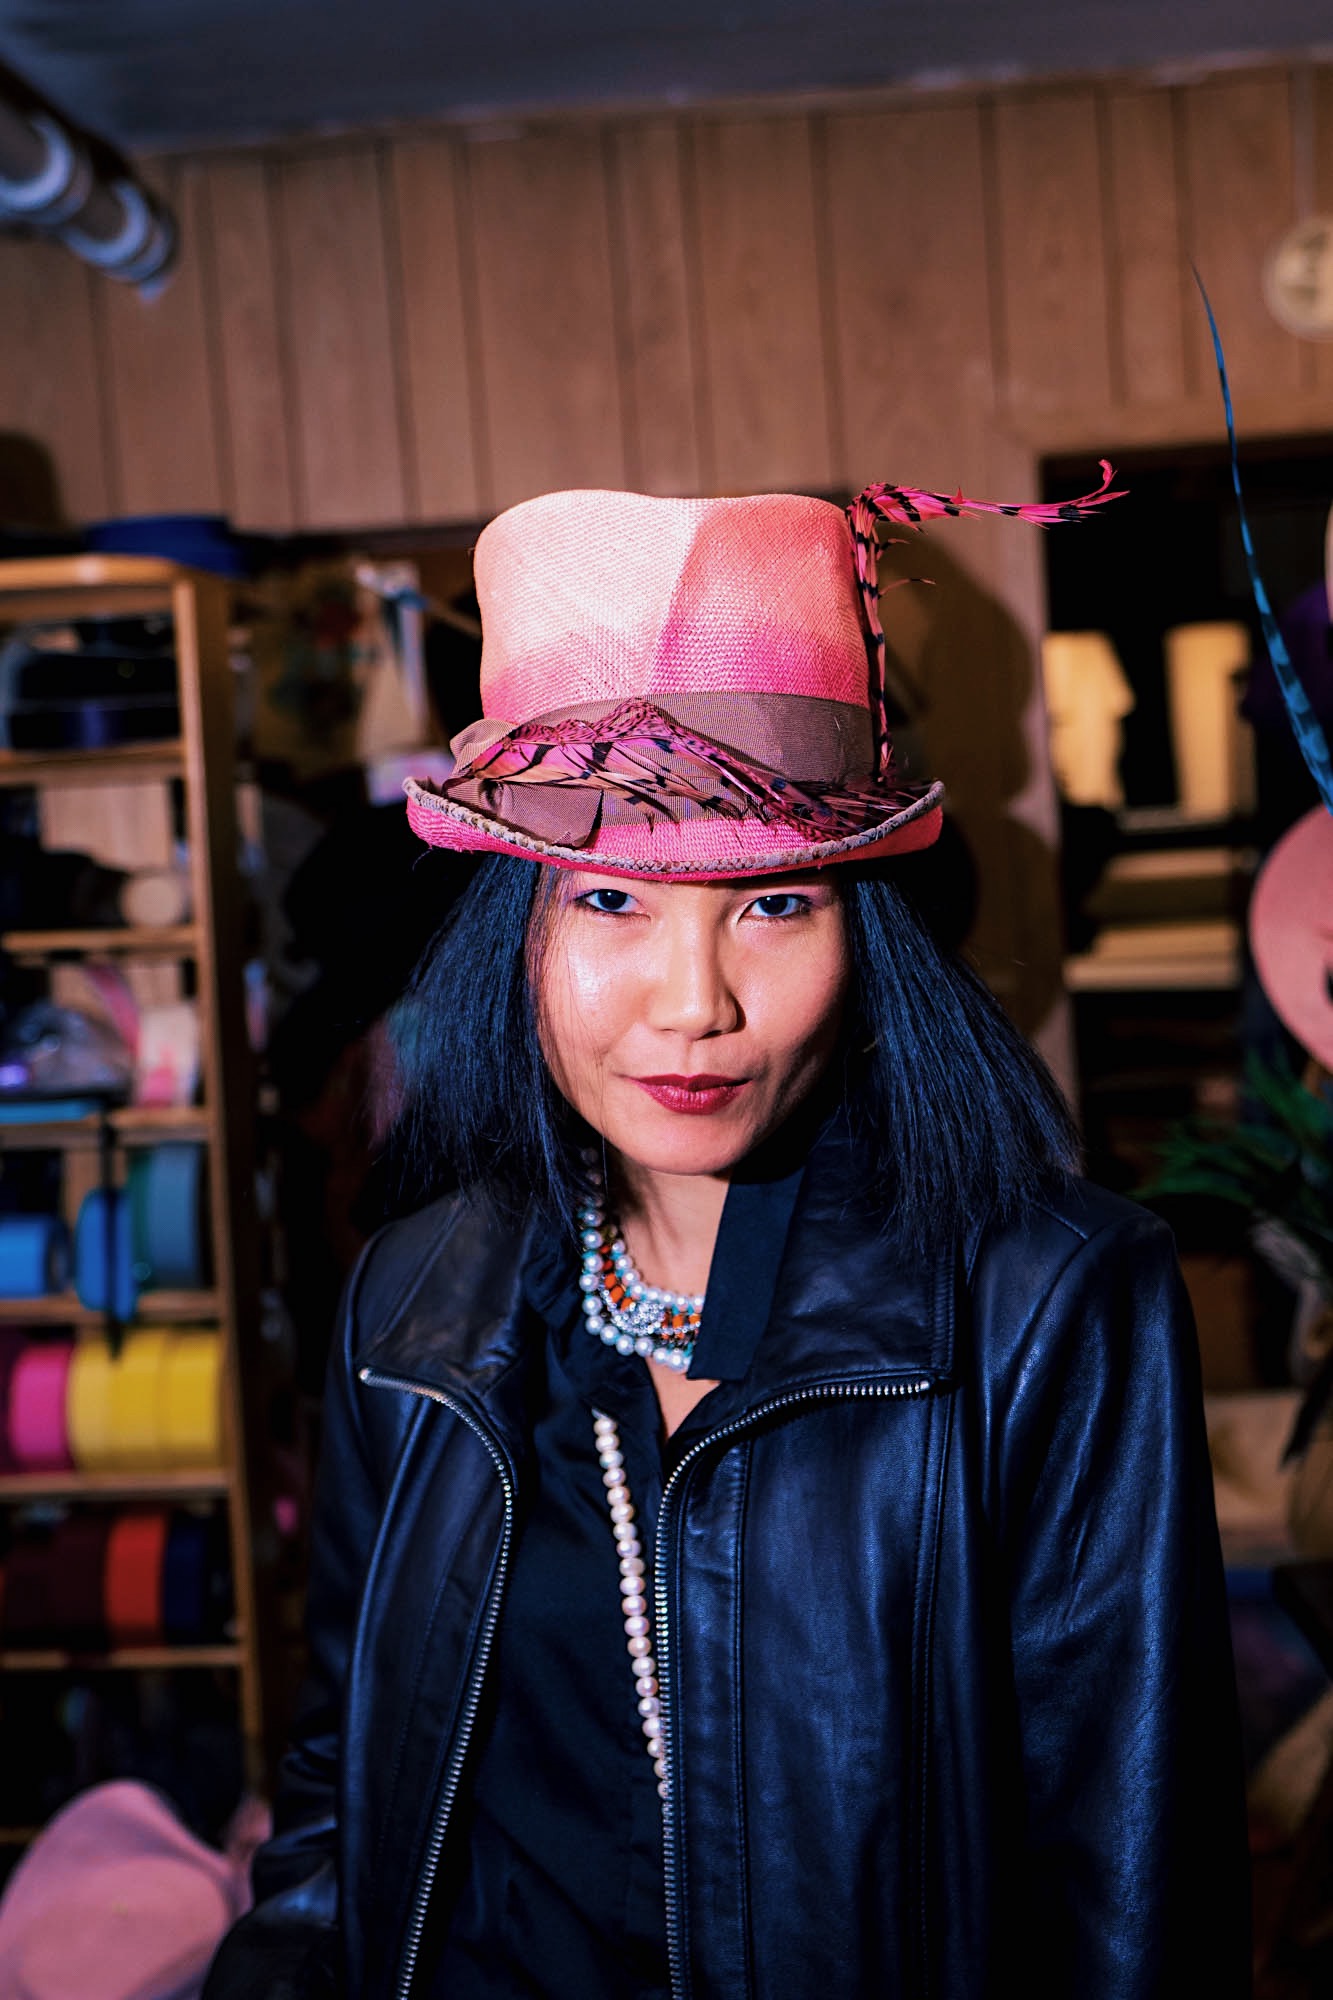 nanphanita is wearing a cha chas top hat in pink